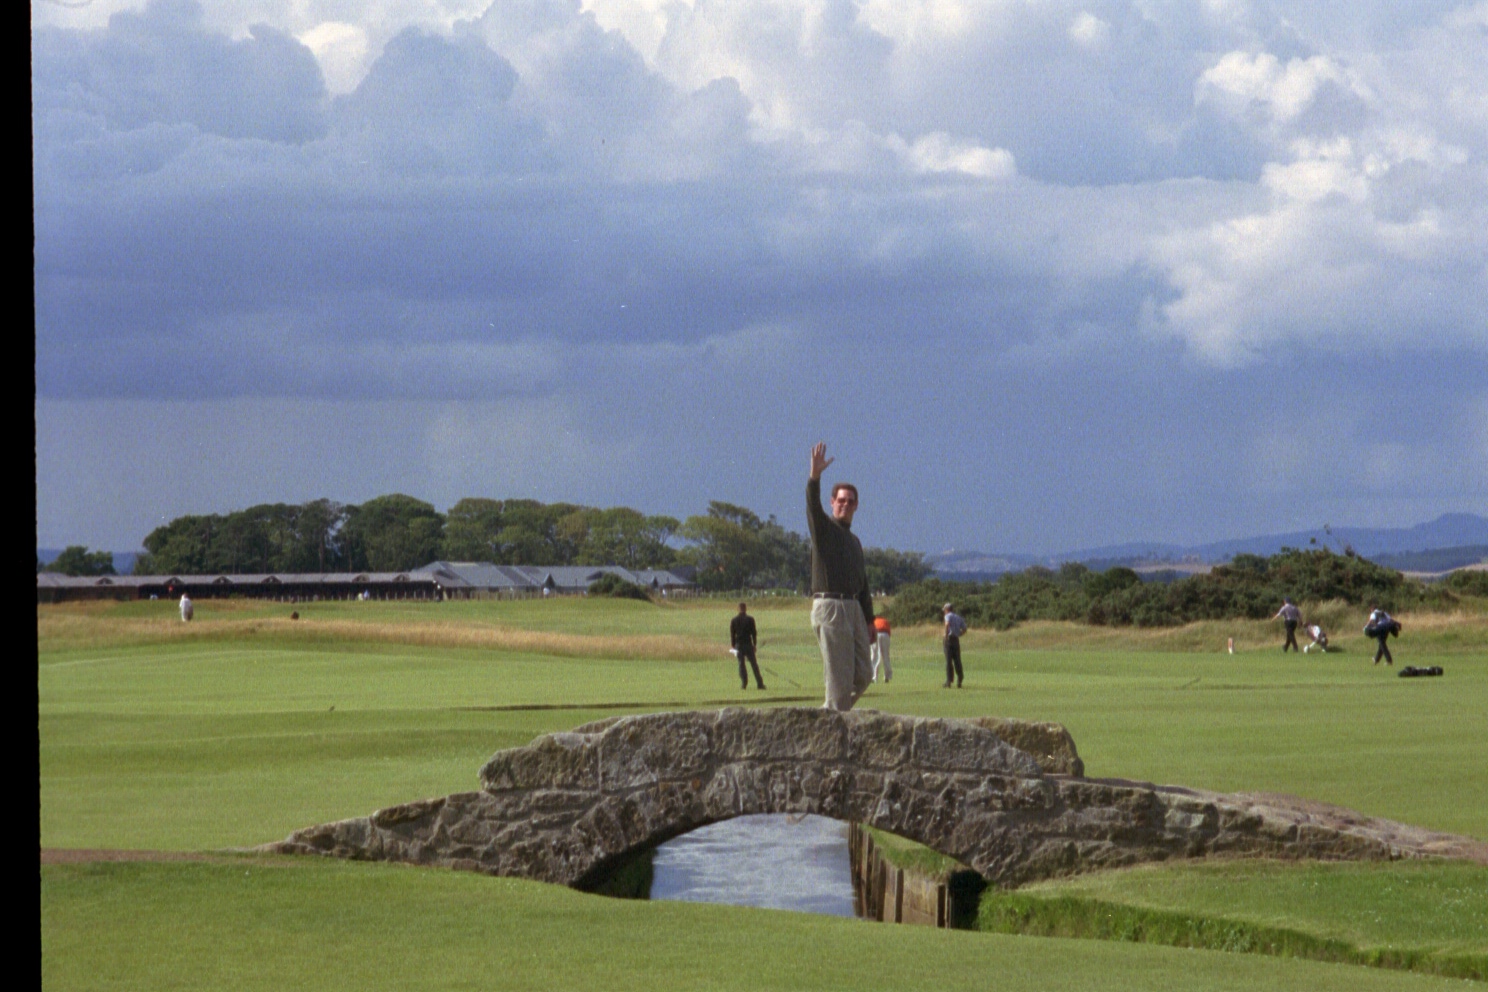 Dick at St. Andrews (The Old Course)